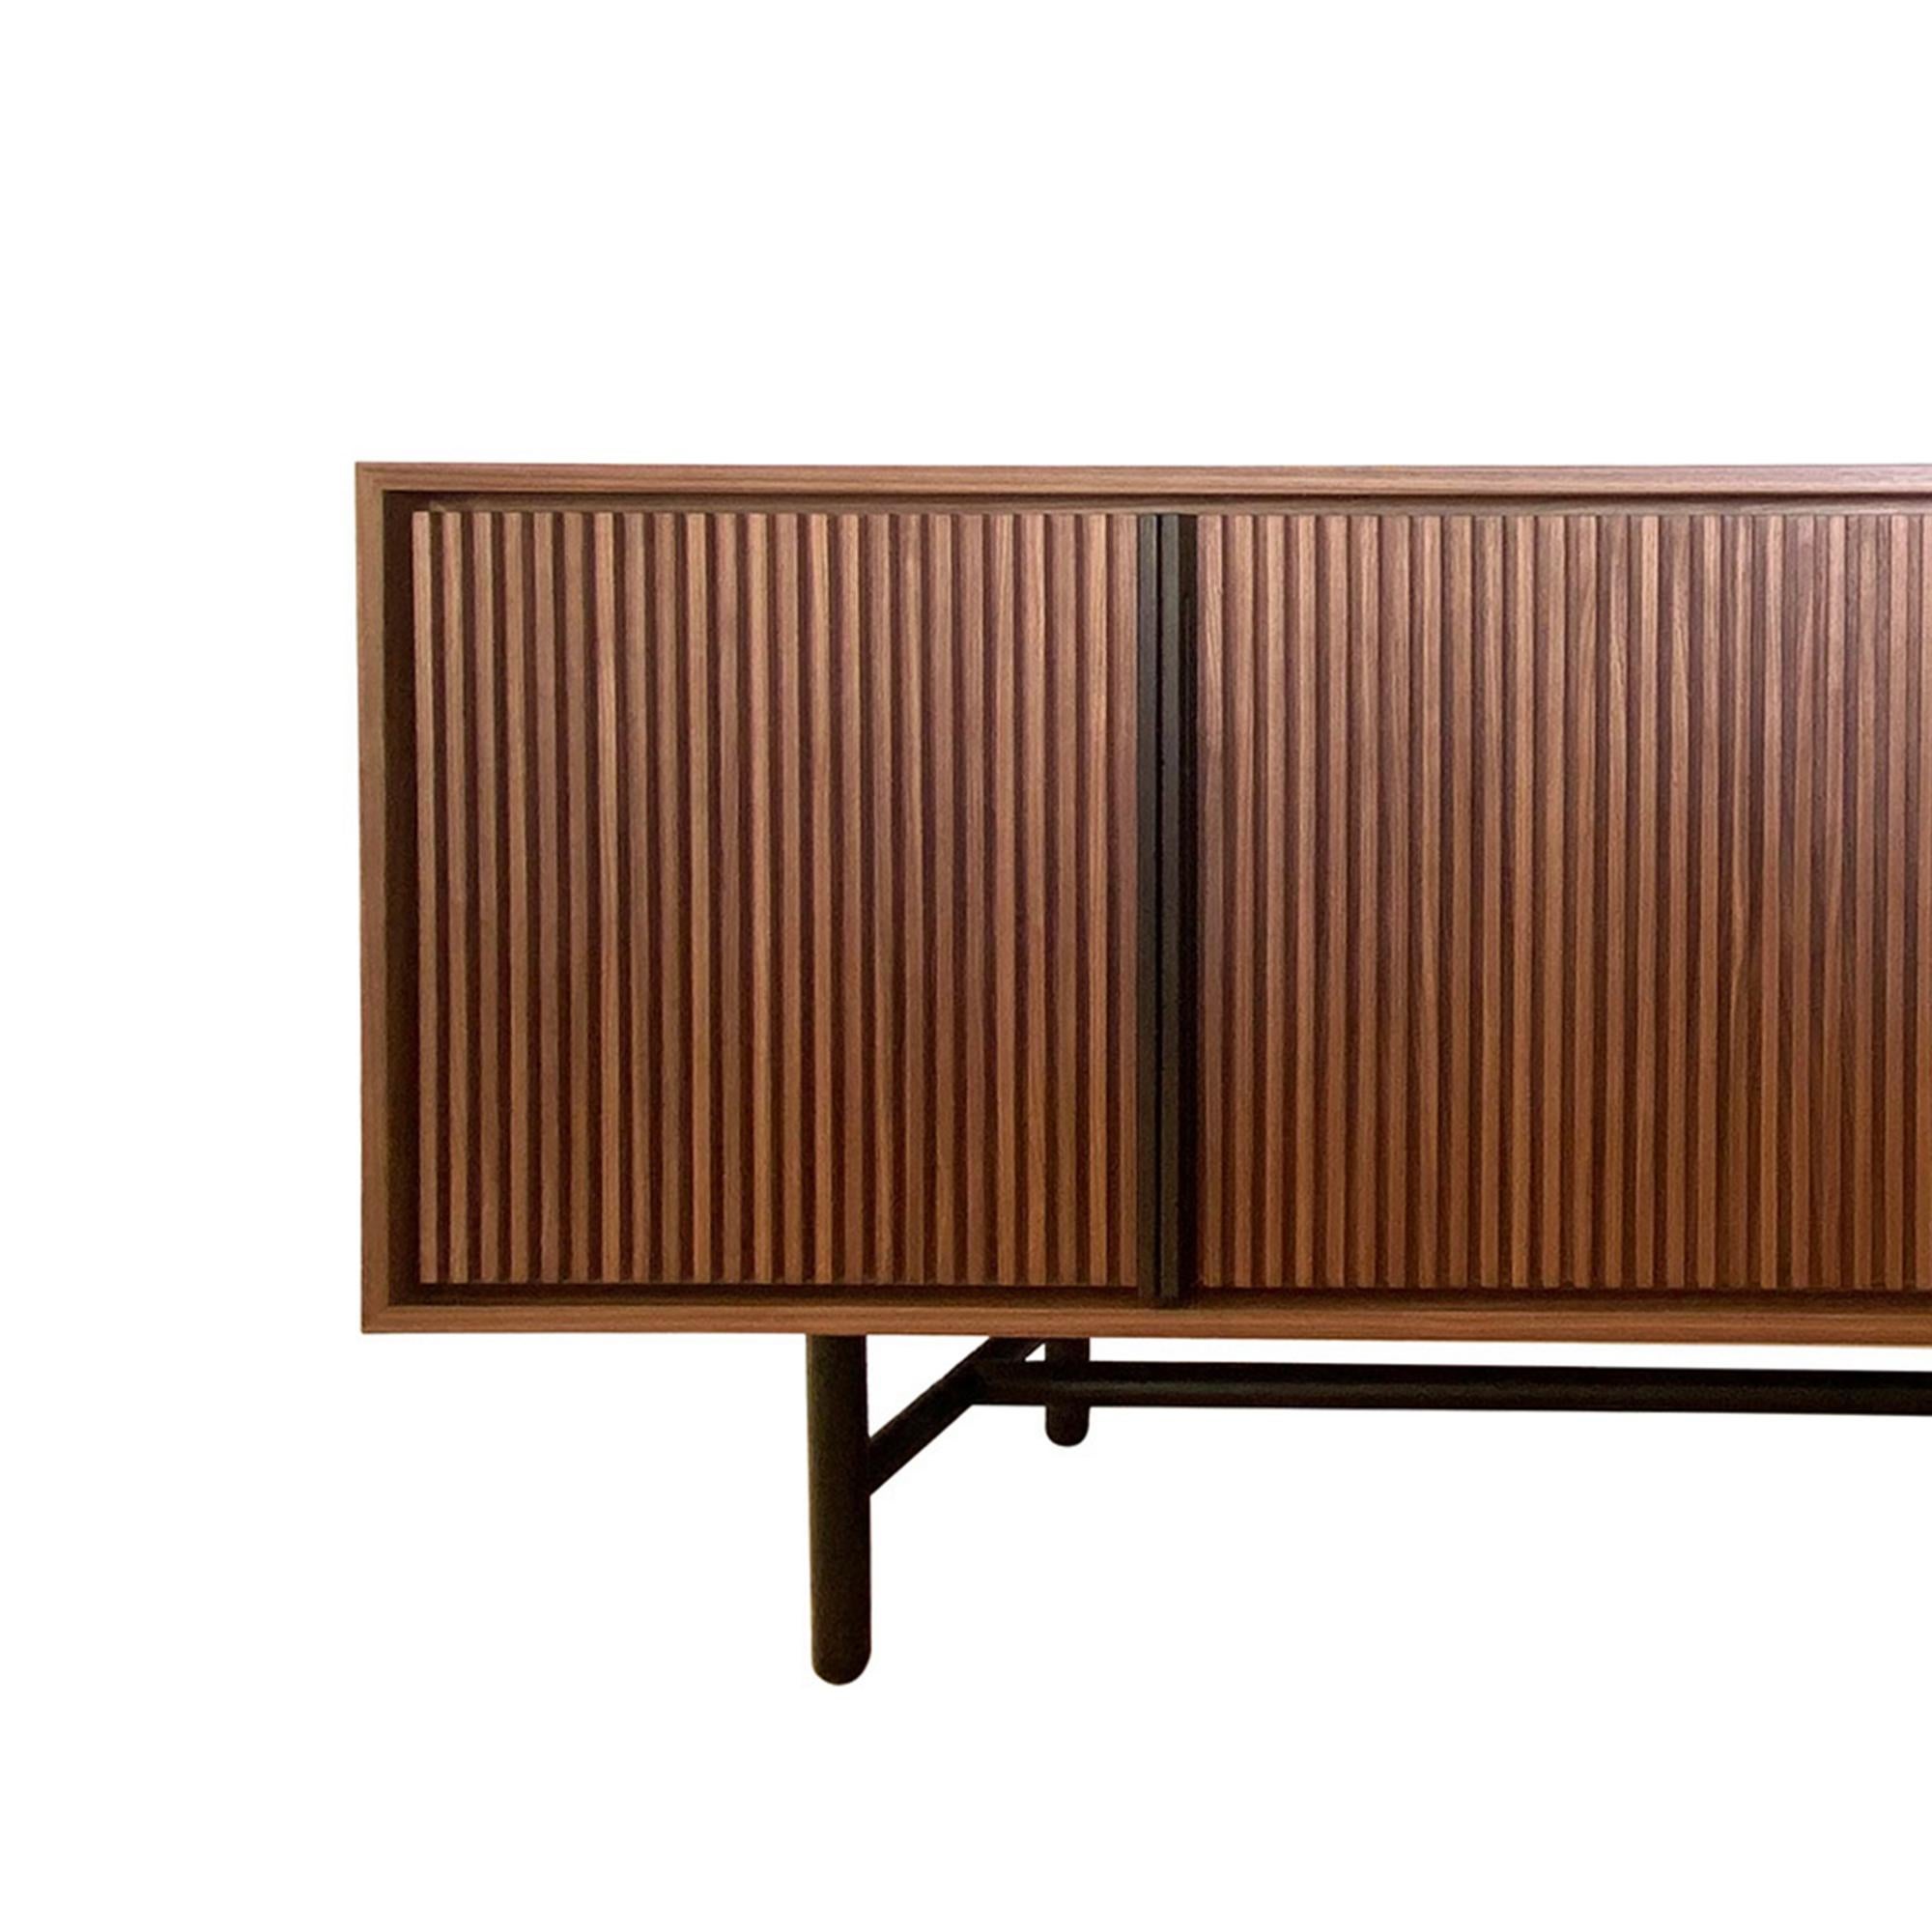 Lattice is a customizable sideboard that strikes a fine balance between functionality, elegance and natural simplicity.

The minimal design language when combined with the two-tone usage of walnut establishes an elegant feel and natural